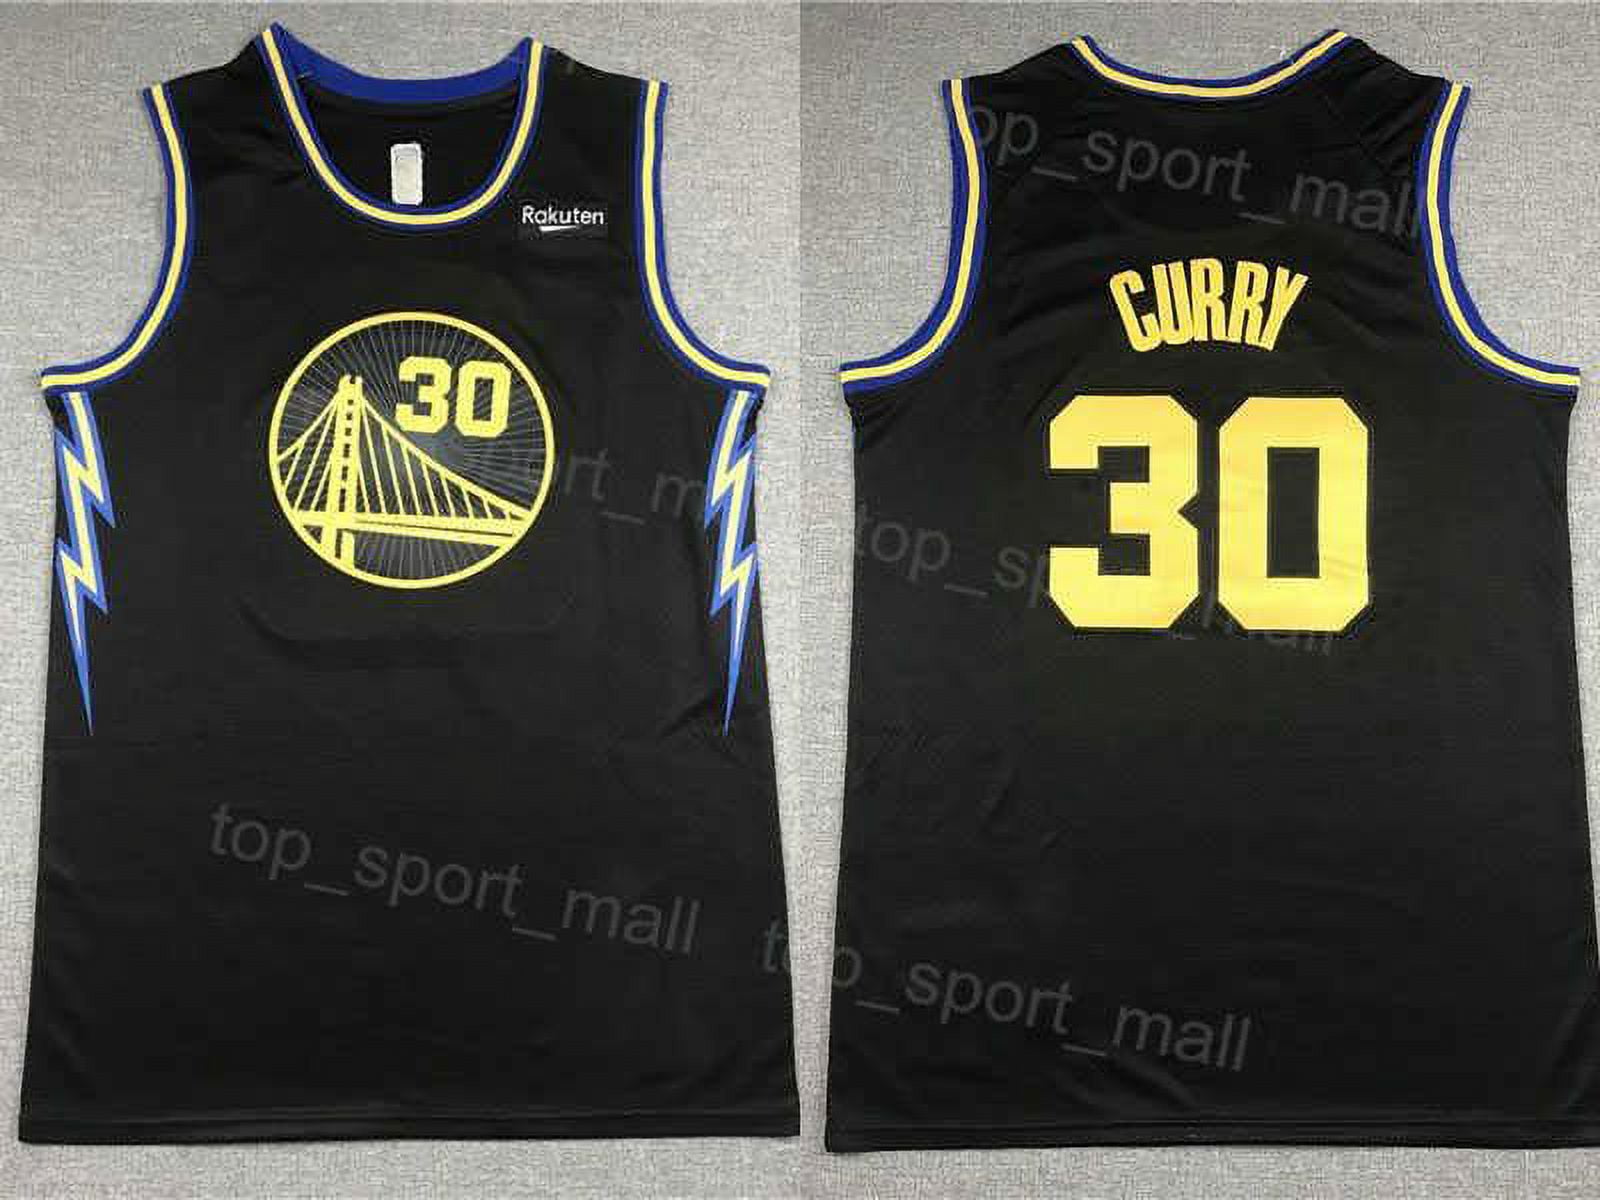  Stephen Curry Jersey